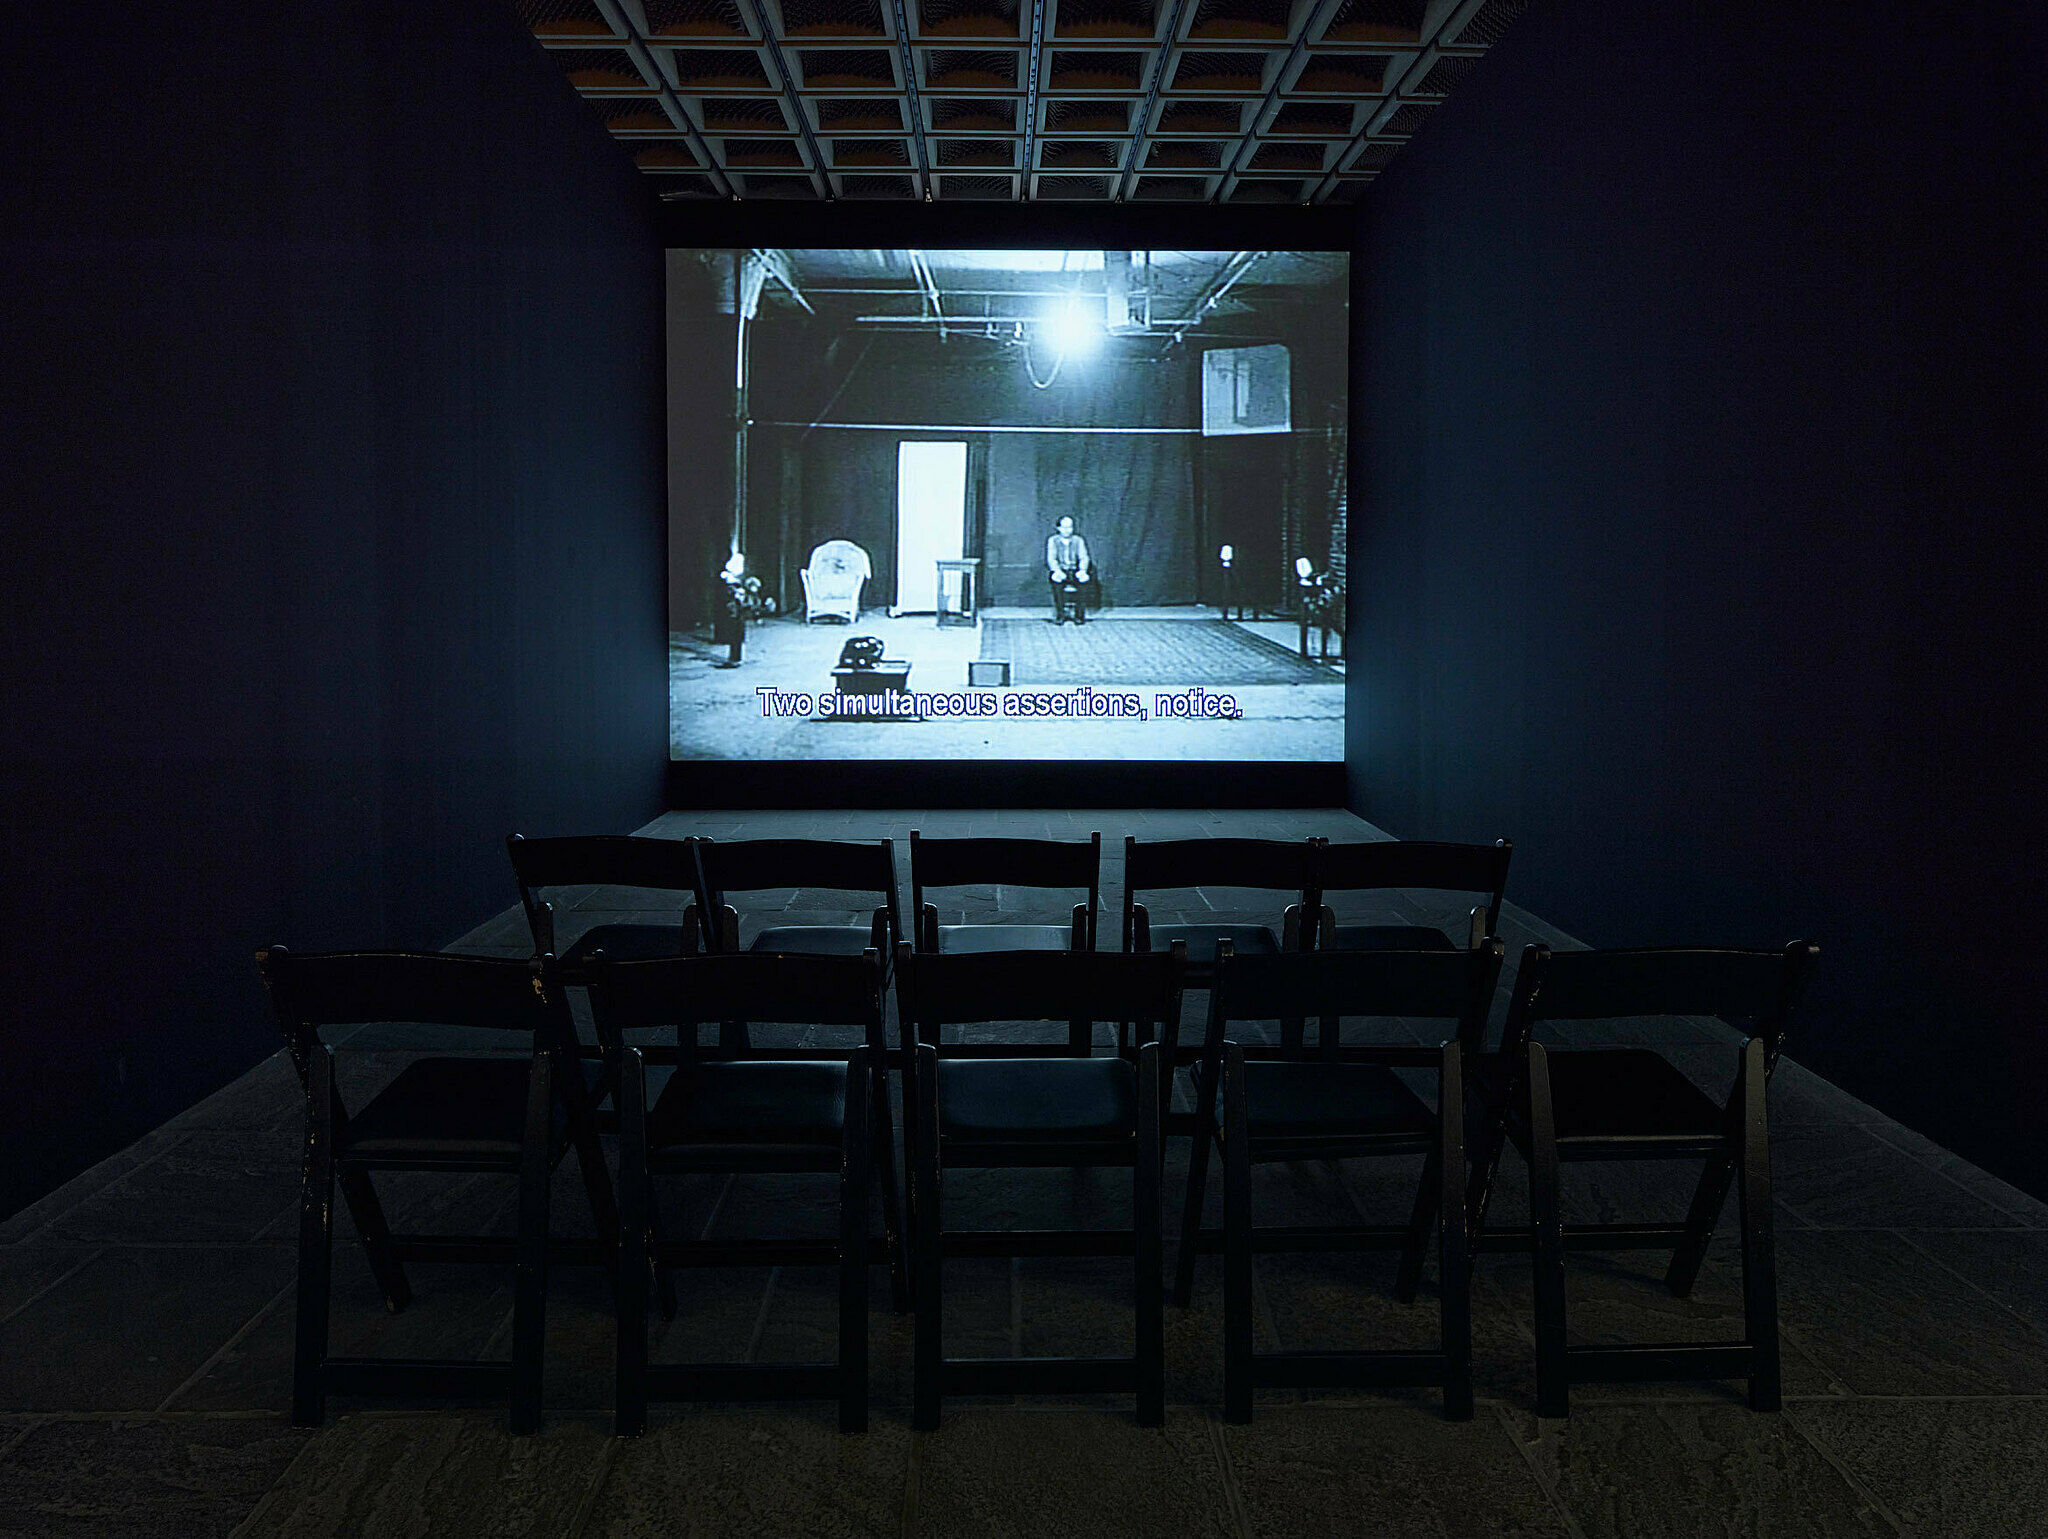 Video projection in a room with folding chairs.